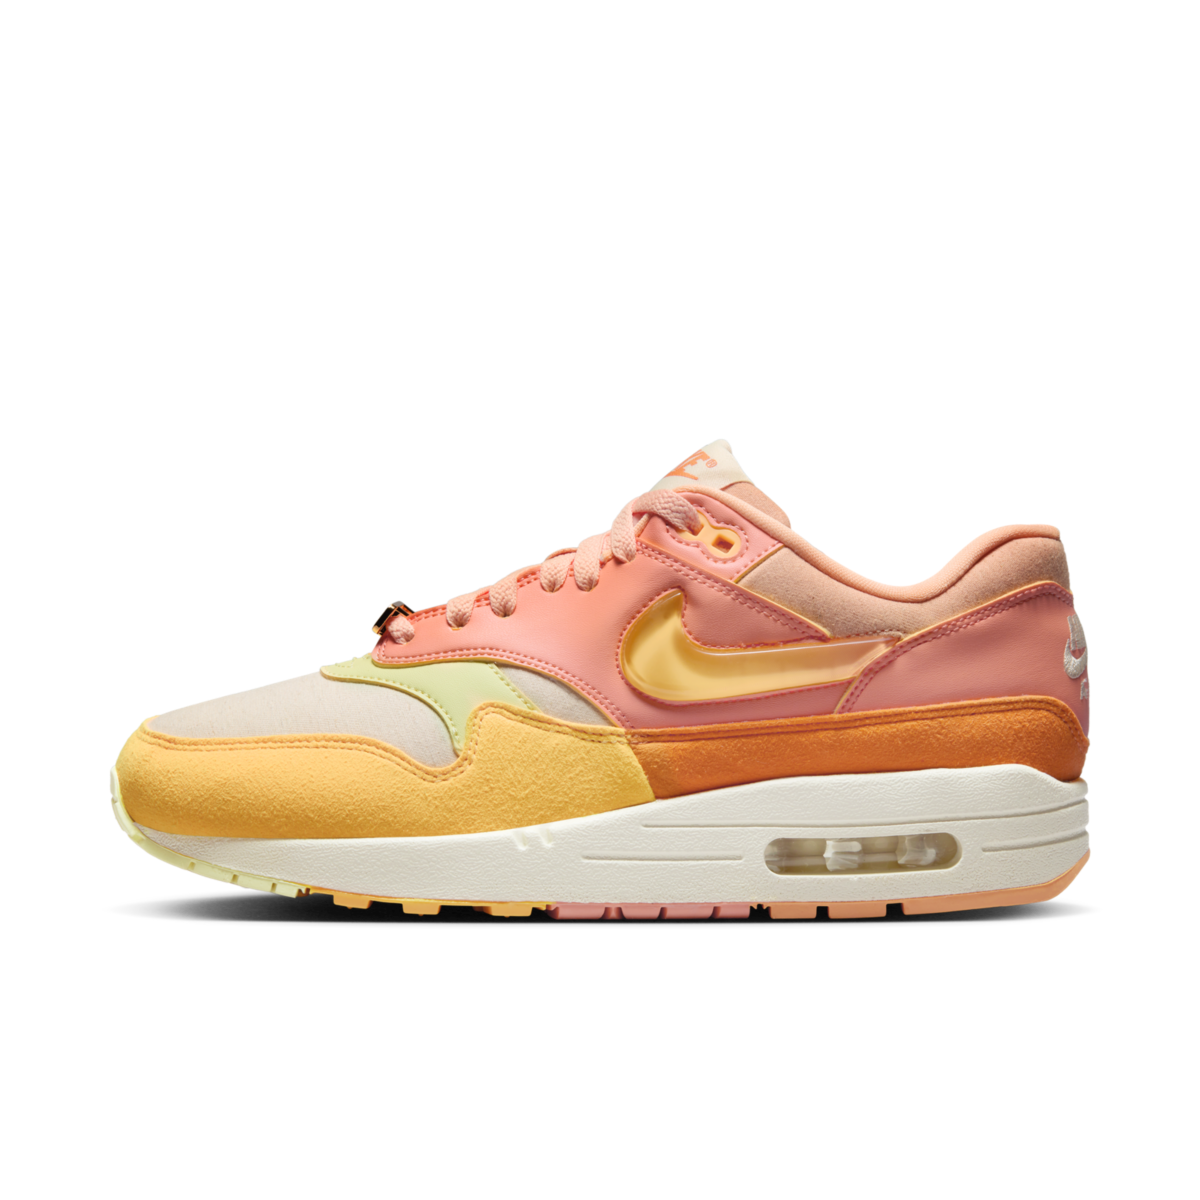 Nike Air Max 1 'Orange Frost' - Puerto Rico Pack